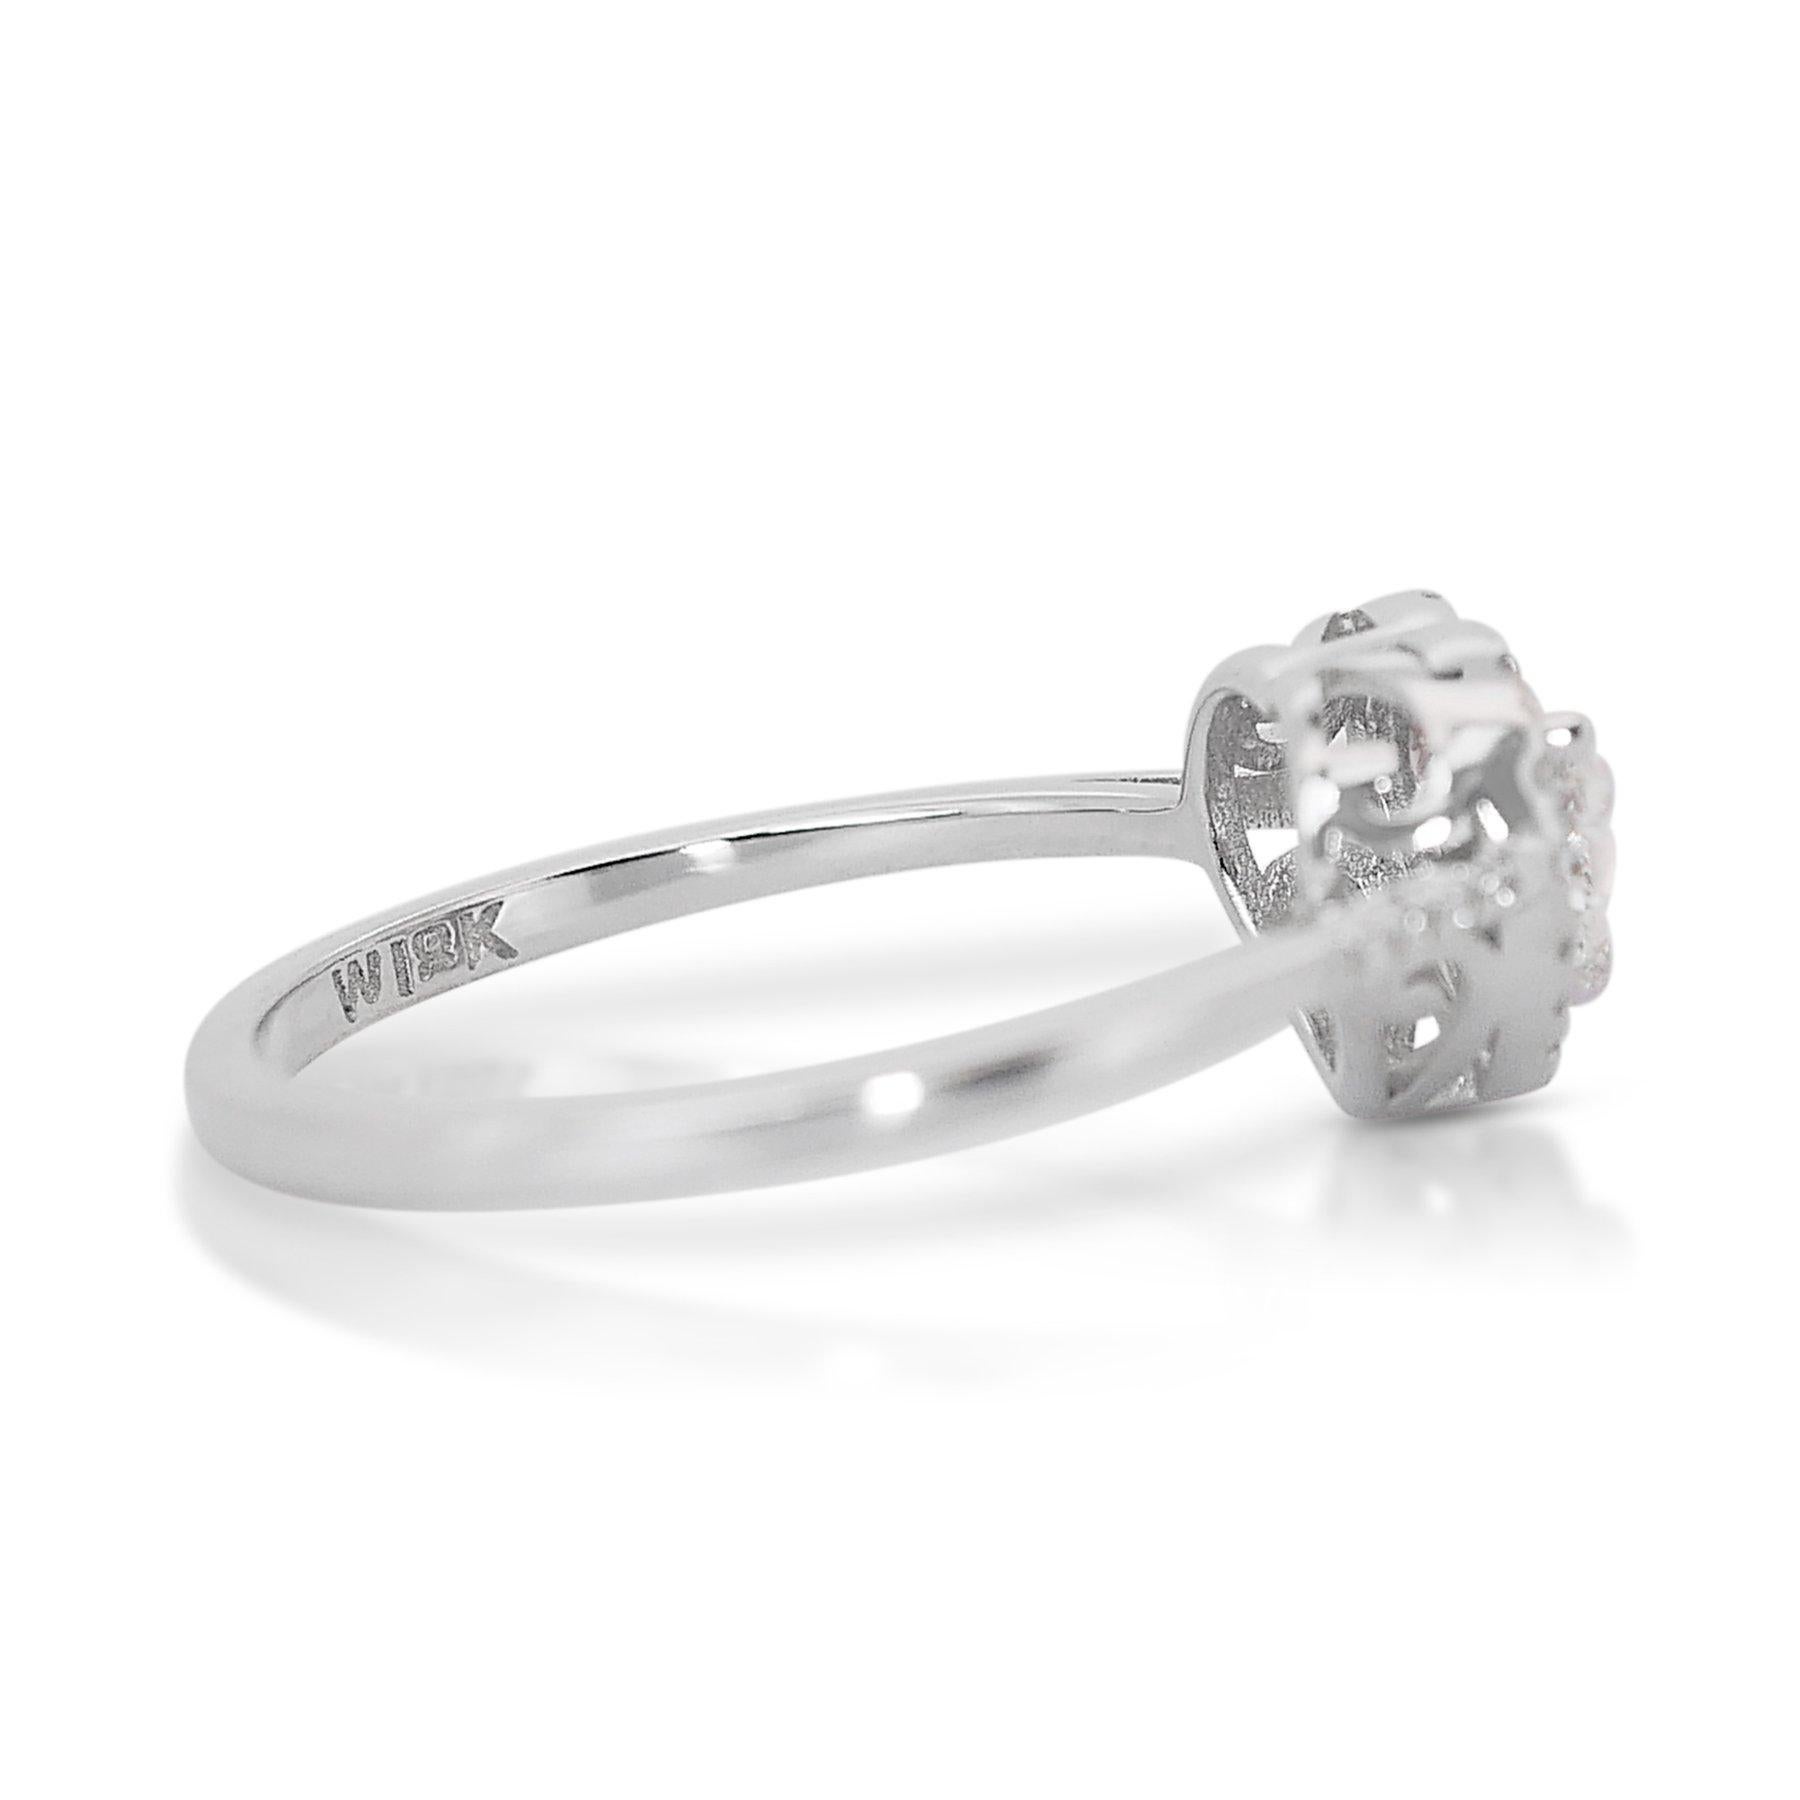 Charming 0.75ct Diamonds Halo Ring in 18k White Gold - IGI Certified In New Condition For Sale In רמת גן, IL